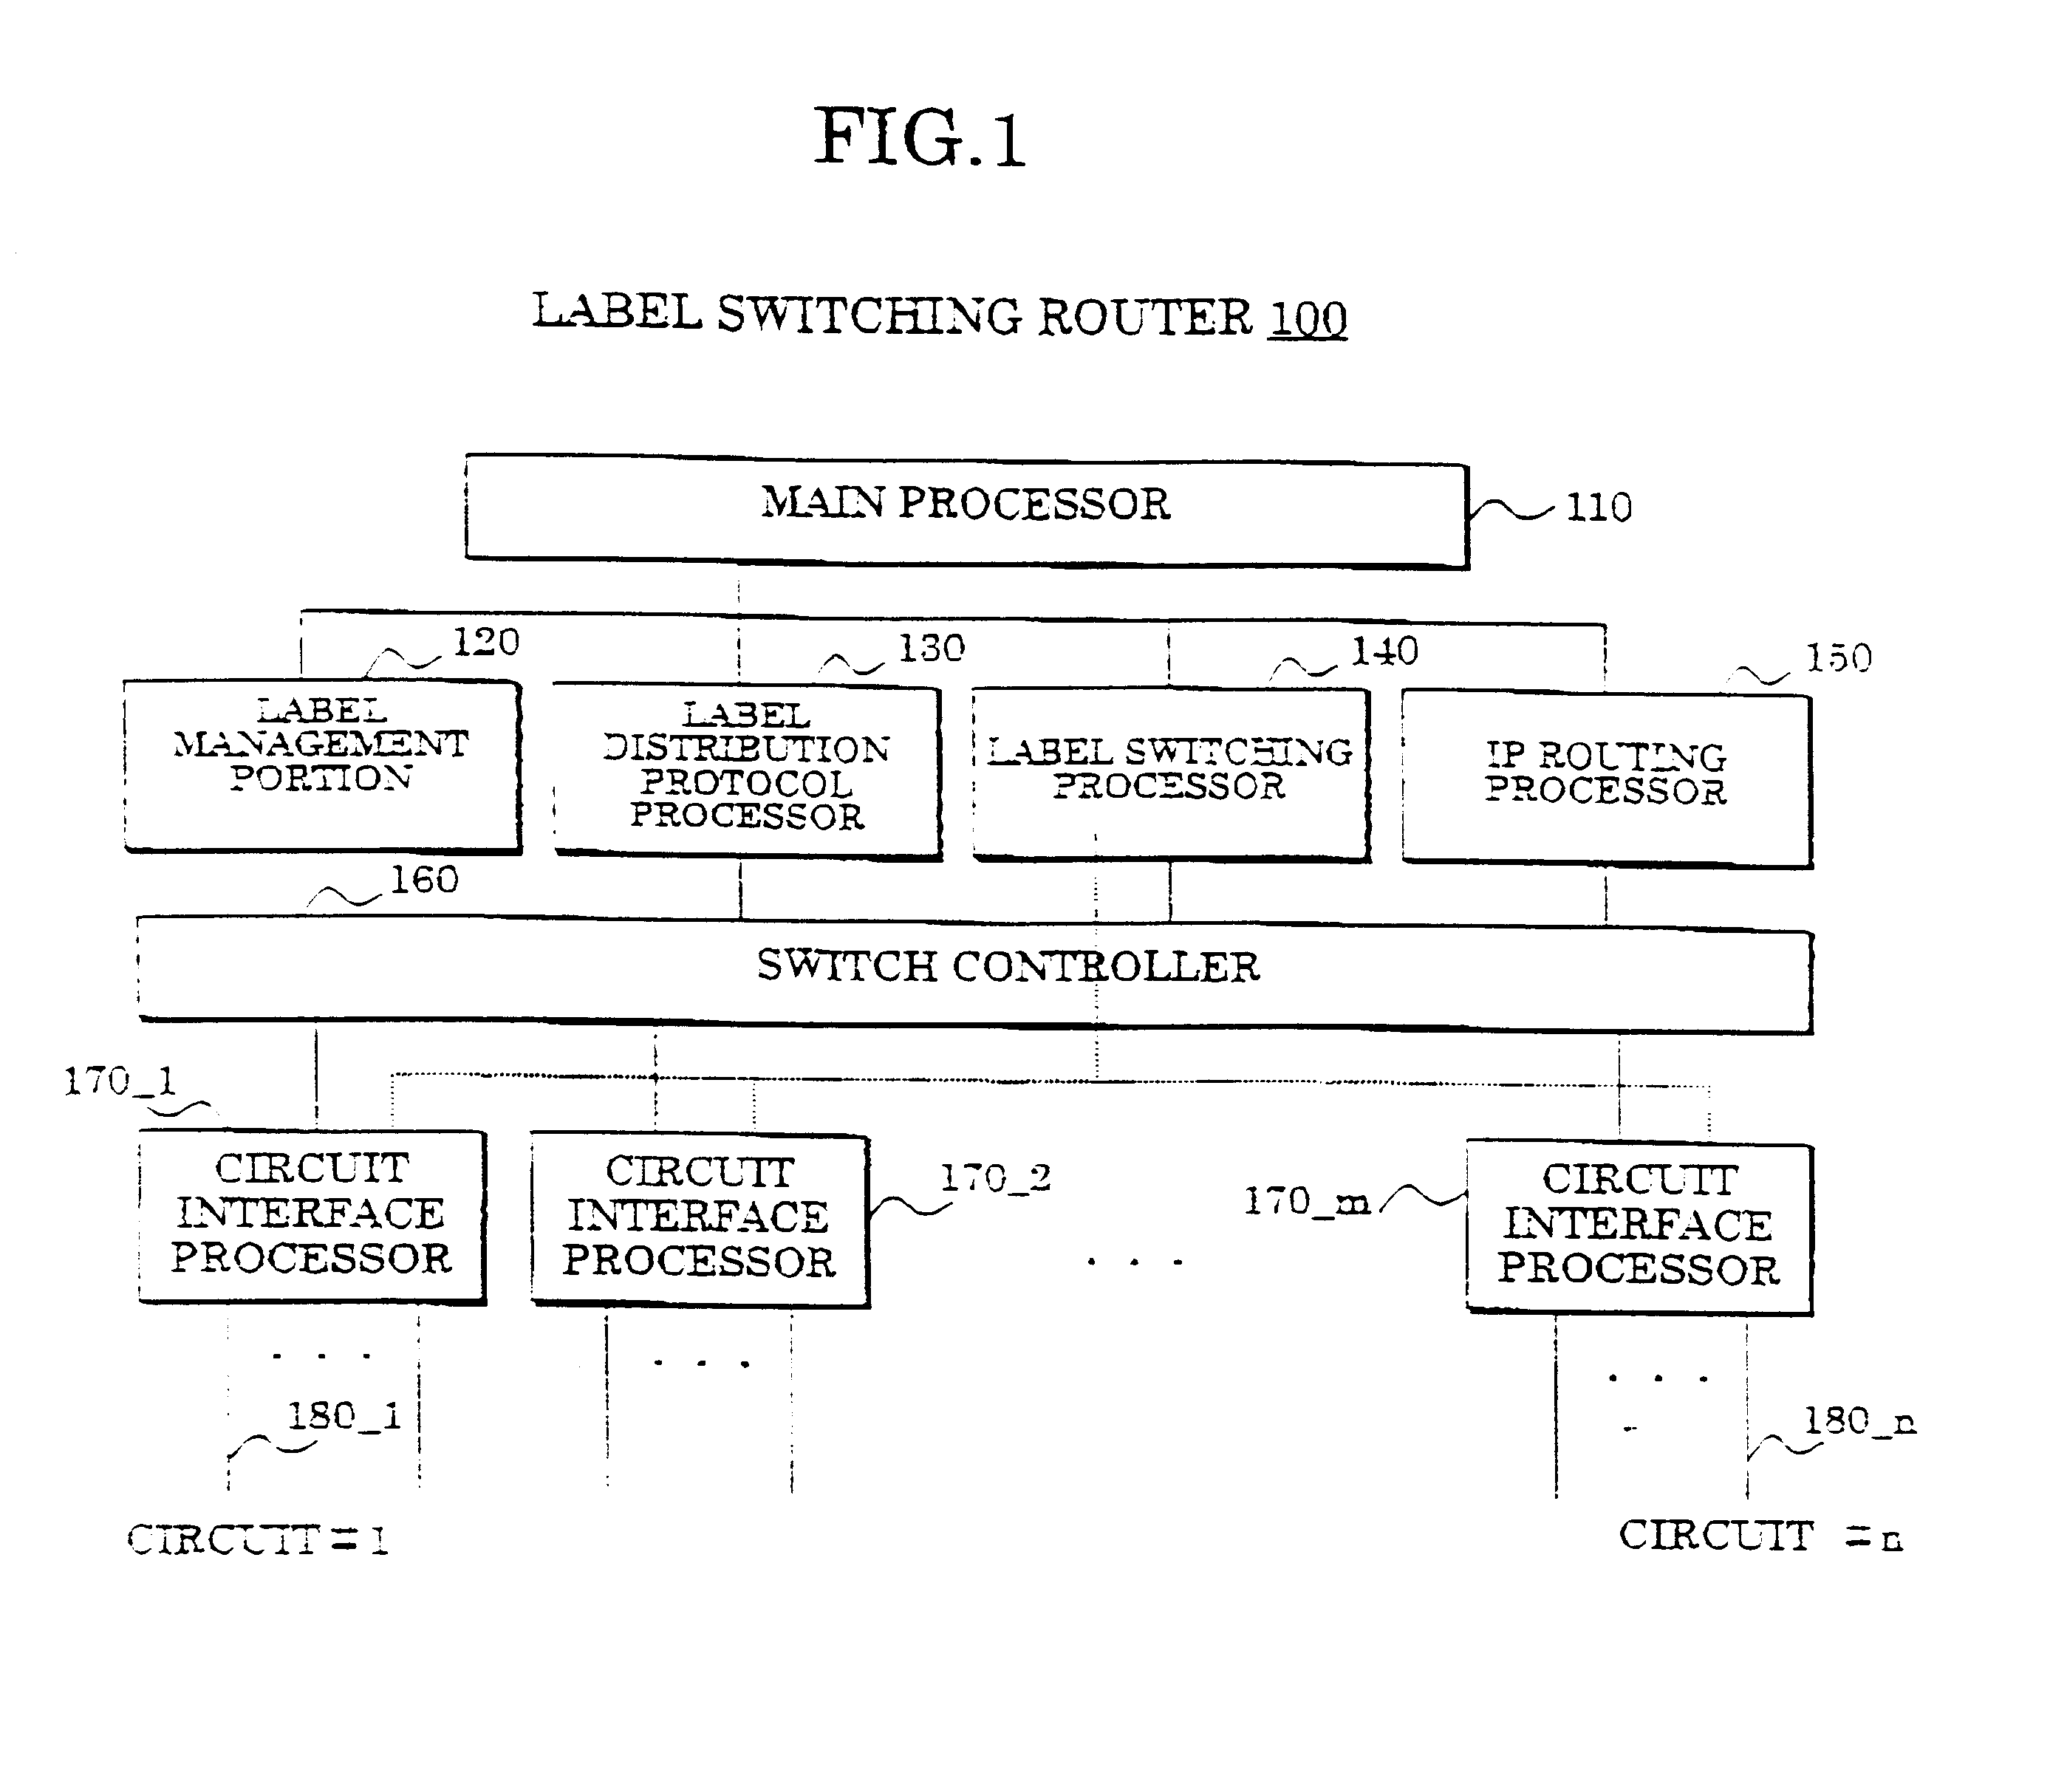 Packet relaying apparatus